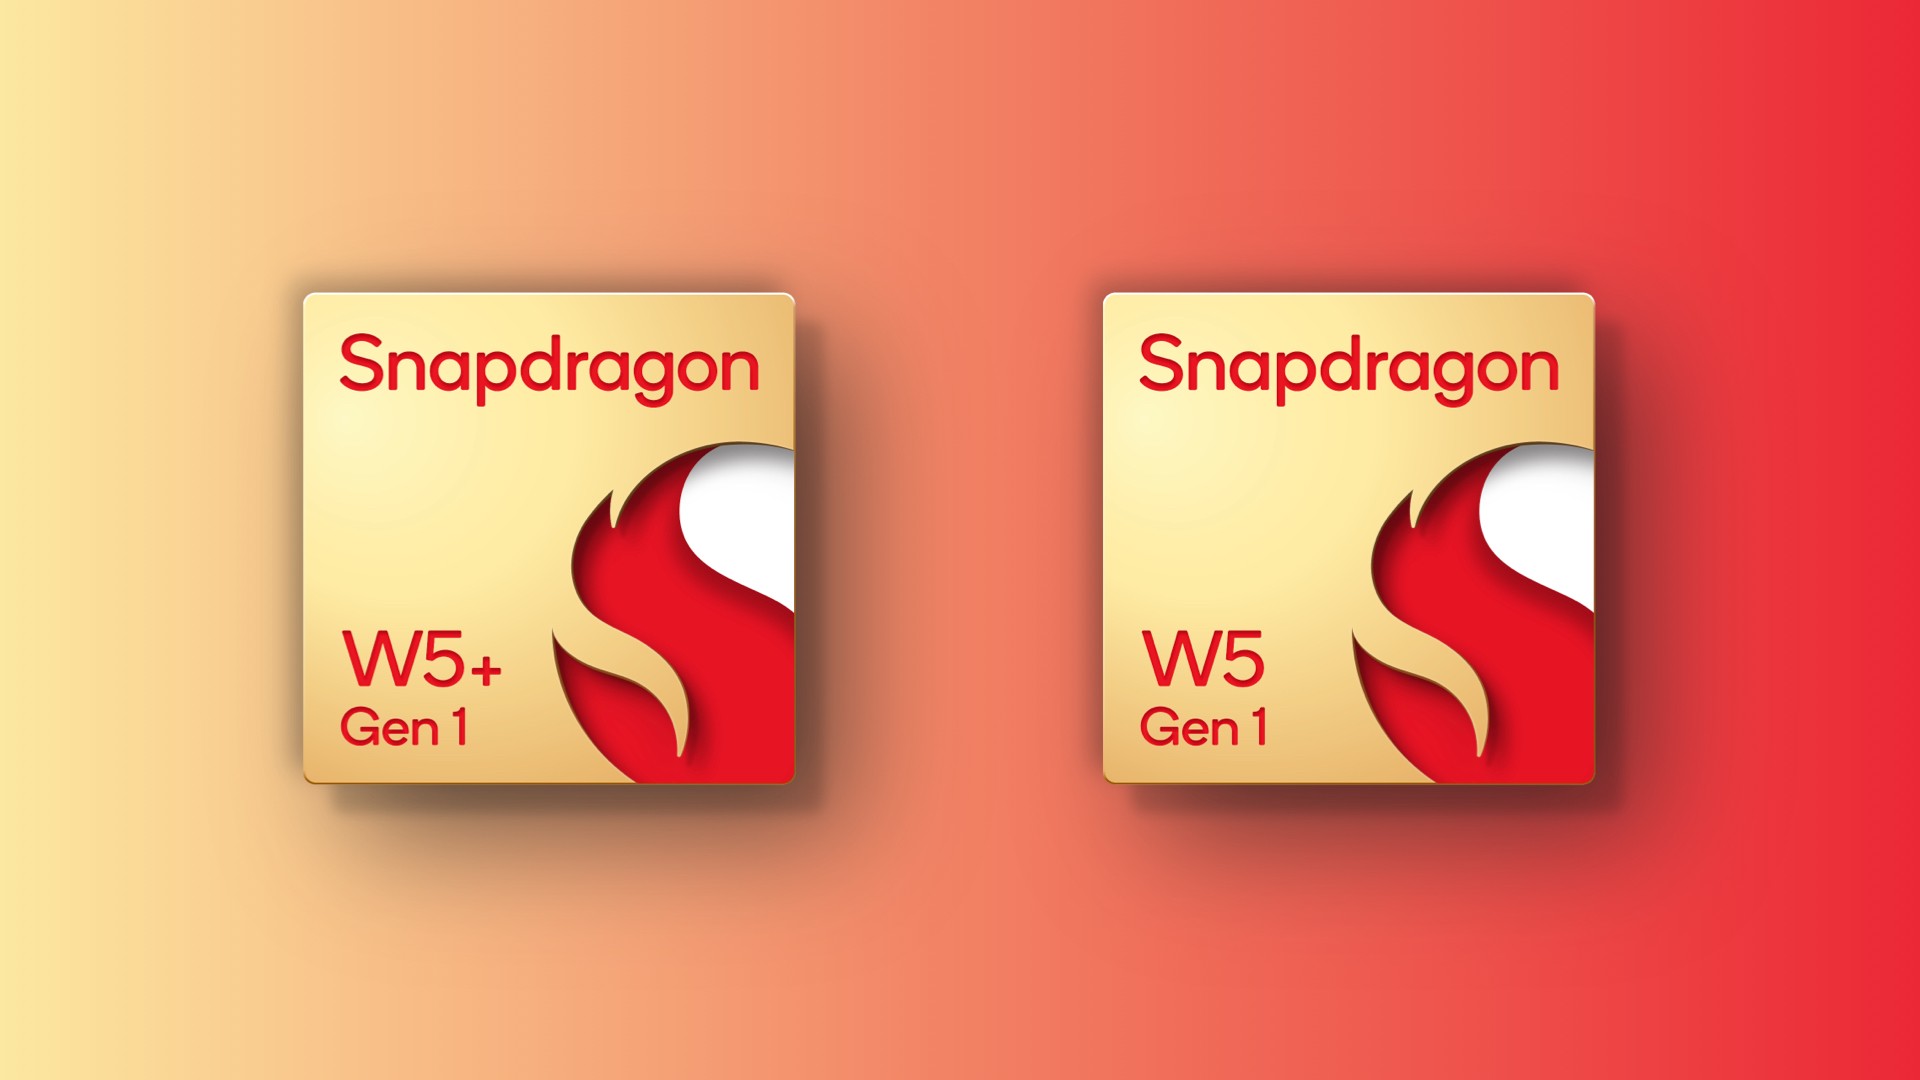 Qualcomm Snapdragon W5 Plus Gen 1 announced: All you should know